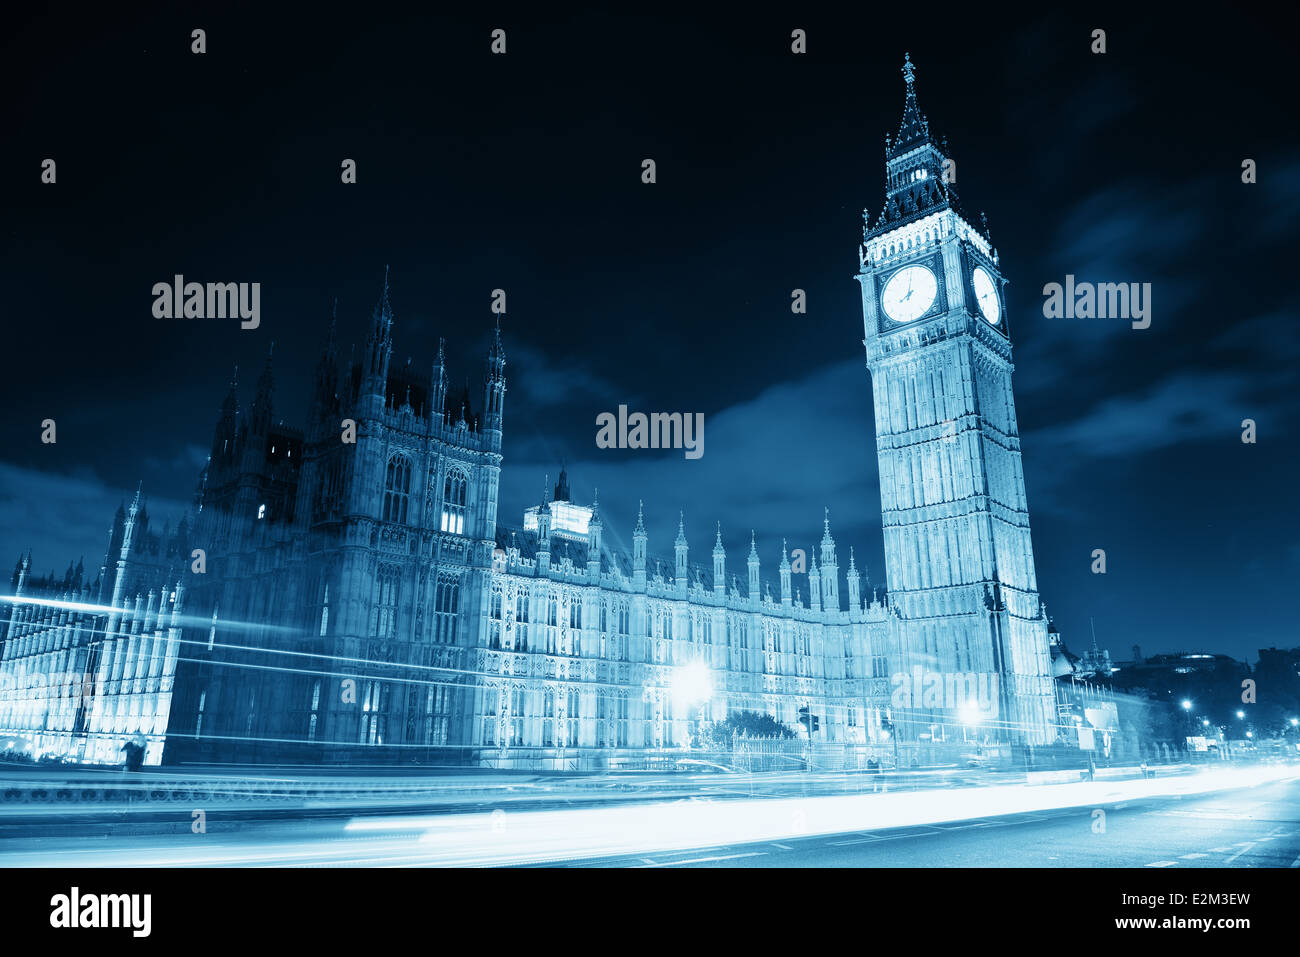 House of Parliament at night, London. Stock Photo